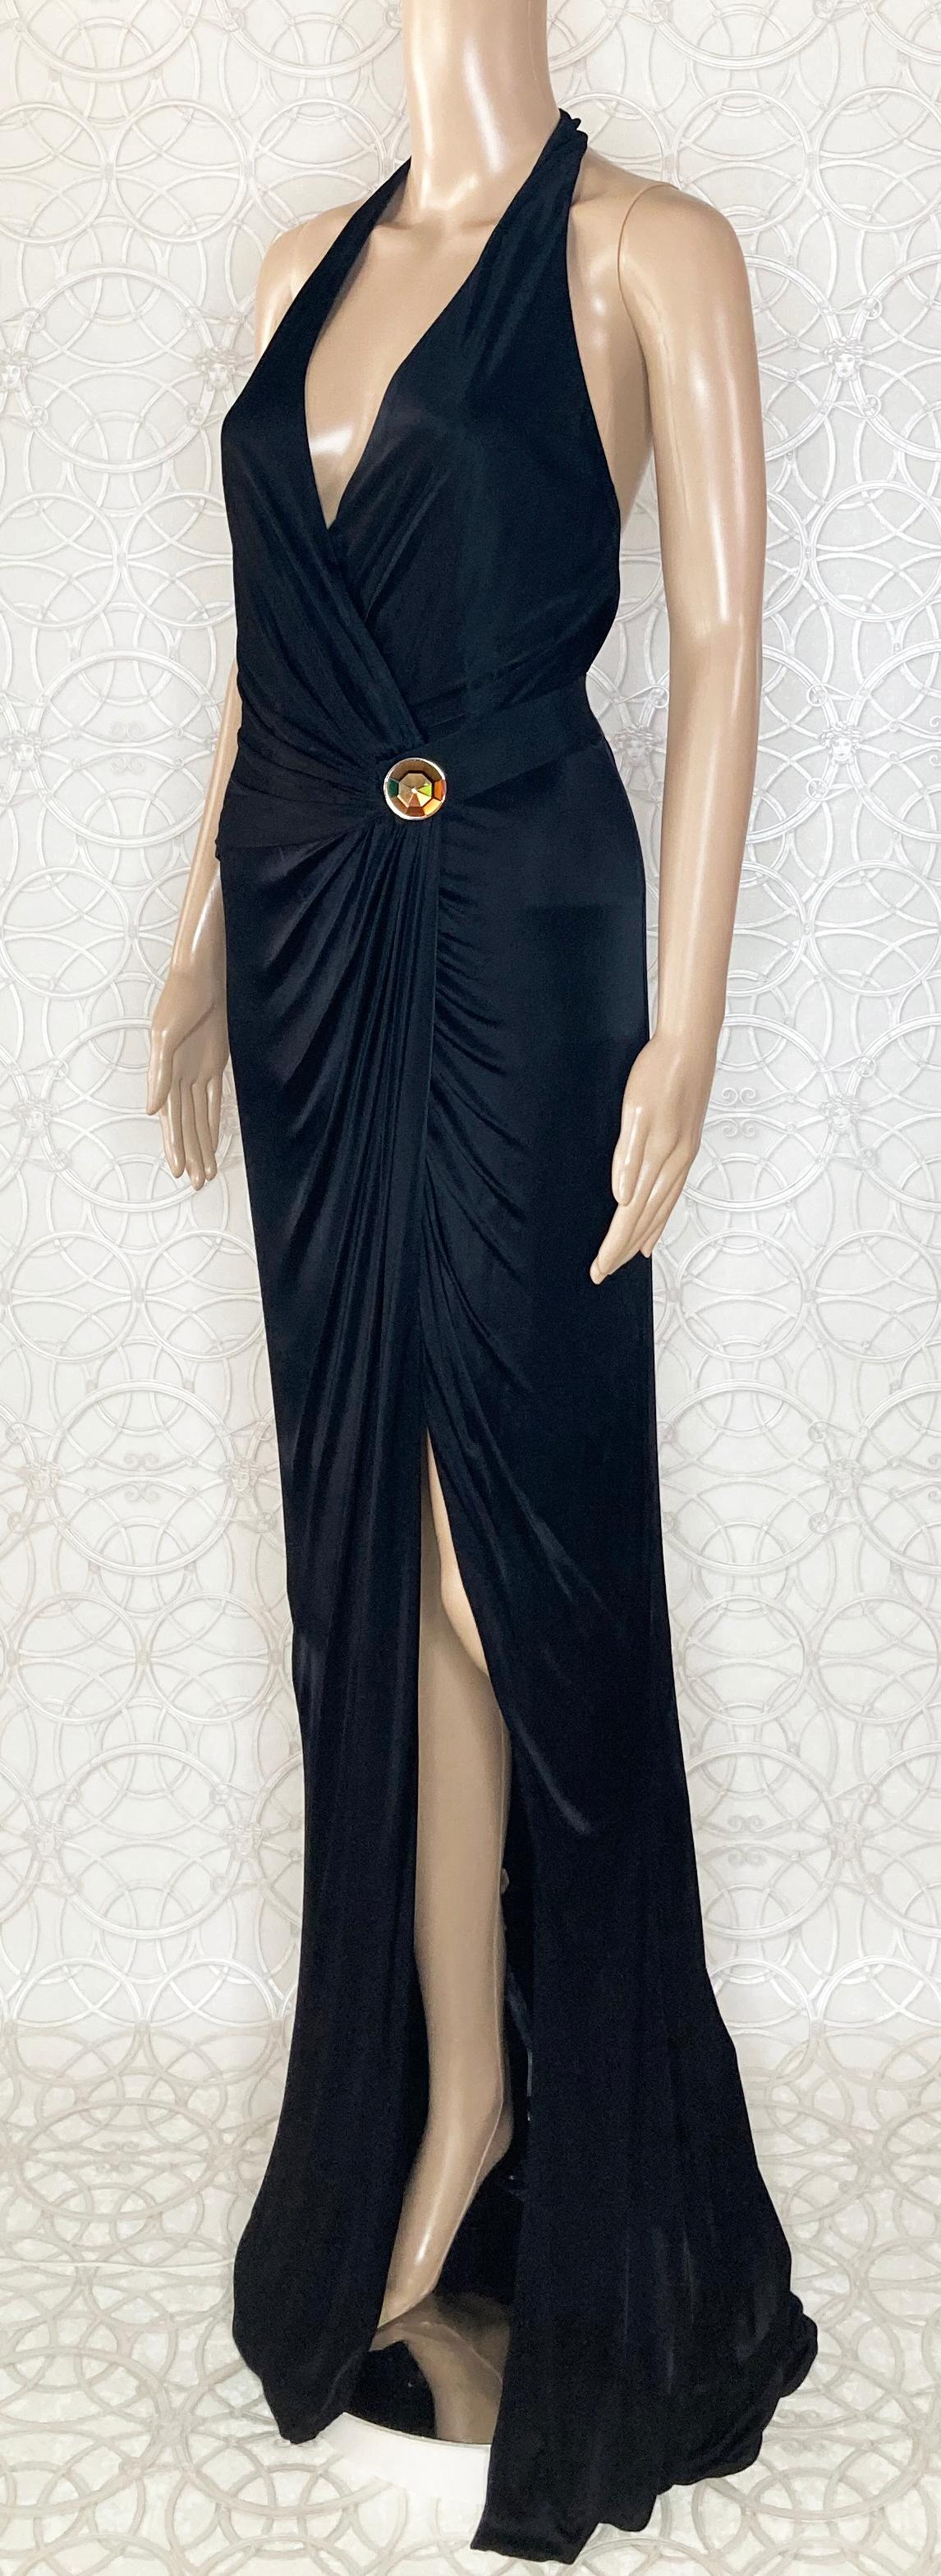 VERSACE BLACK VISCOSE LONG GOWN DRESS with OPEN BACK 42 - 6 For Sale 4